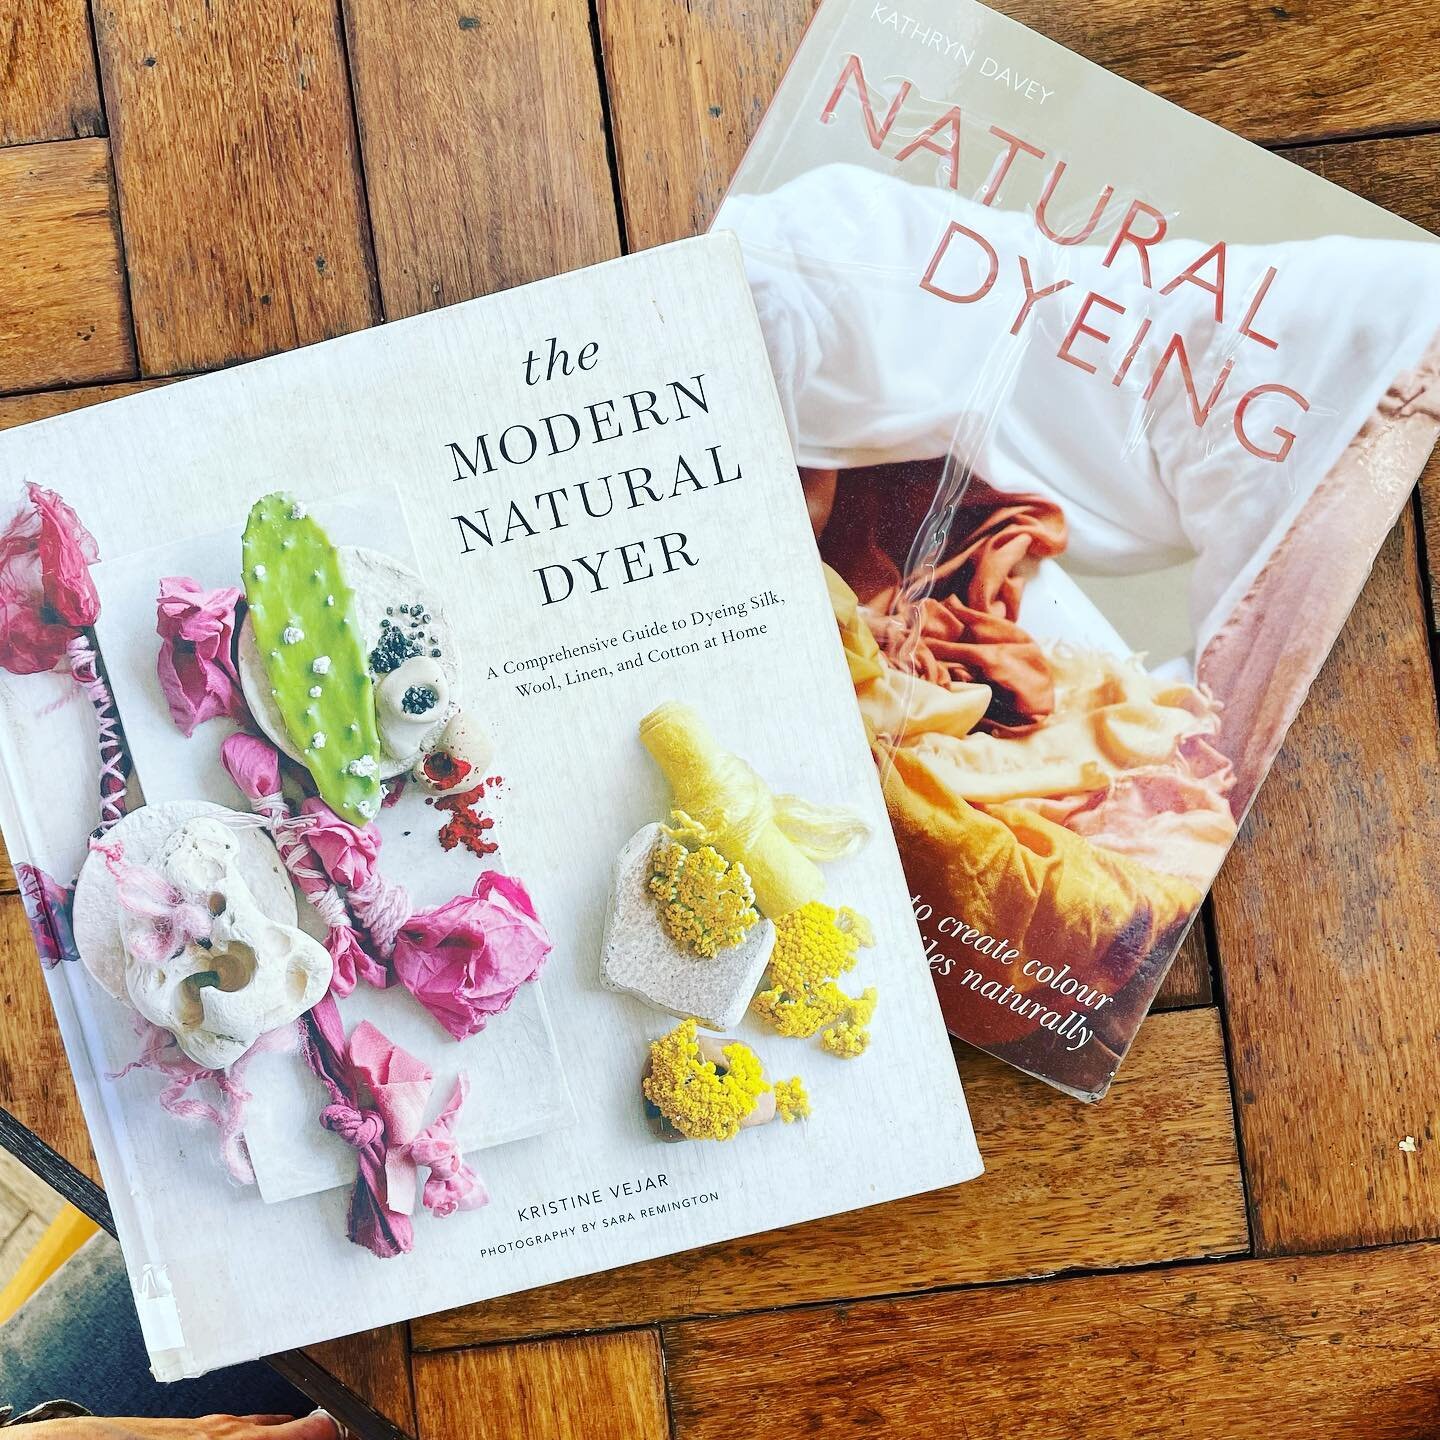 Recently I&rsquo;ve been getting very intrigued by natural dyeing. I&rsquo;ve taken two fantastic free workshops by @kathryn_davey and @talu.earth and borrowed these books from the library (Kathryn Davey&rsquo;s one is just gorgeous and is now going 